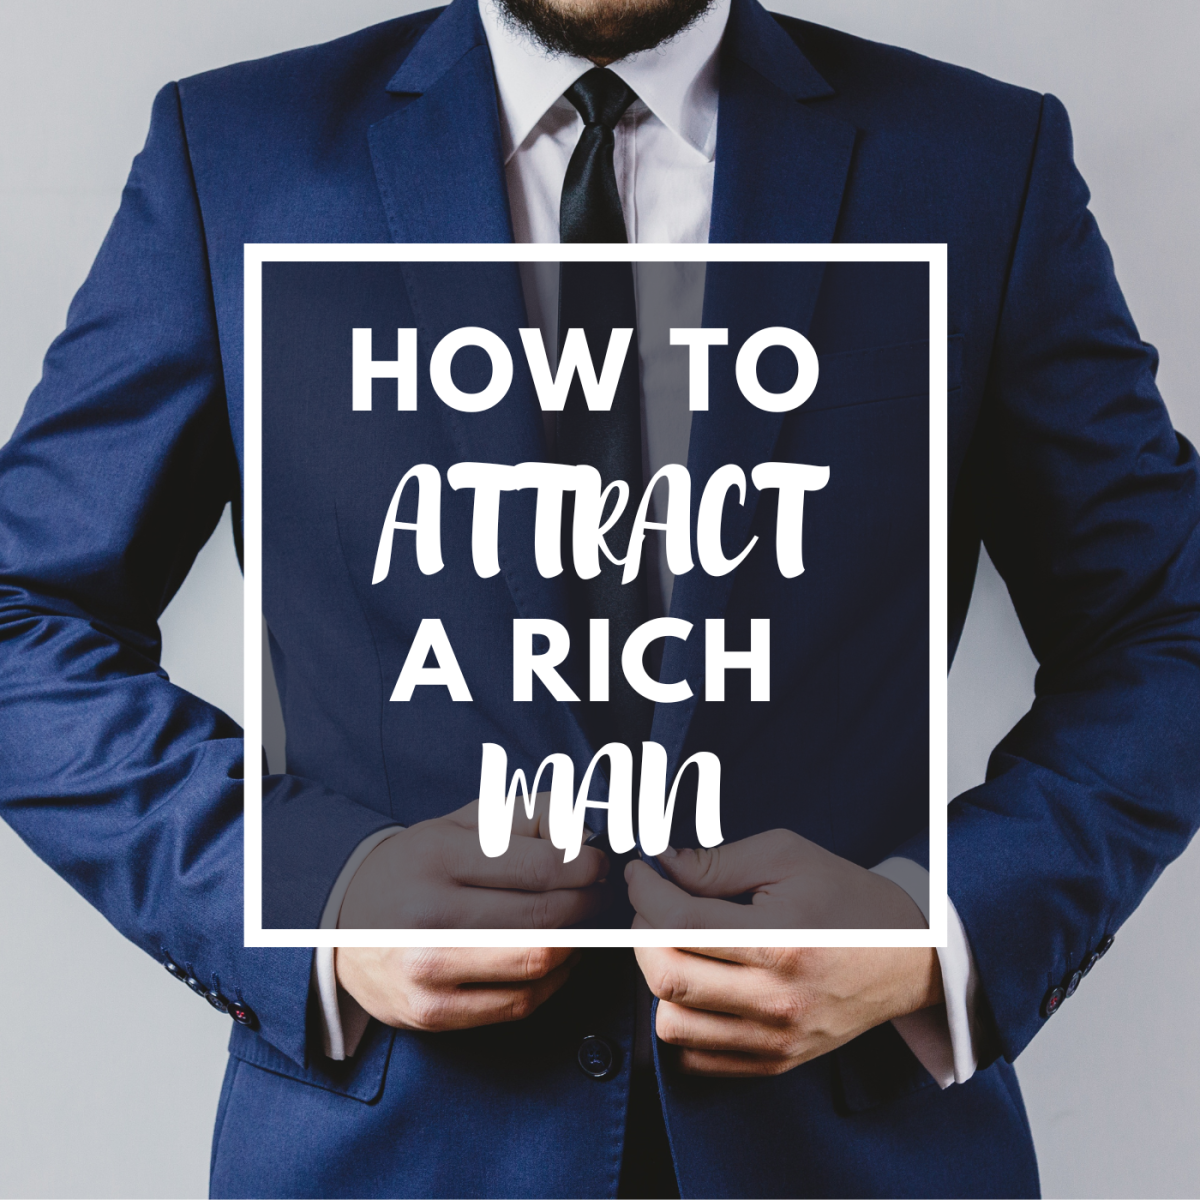 Win a Rich Man by Avoiding These Common Mistakes